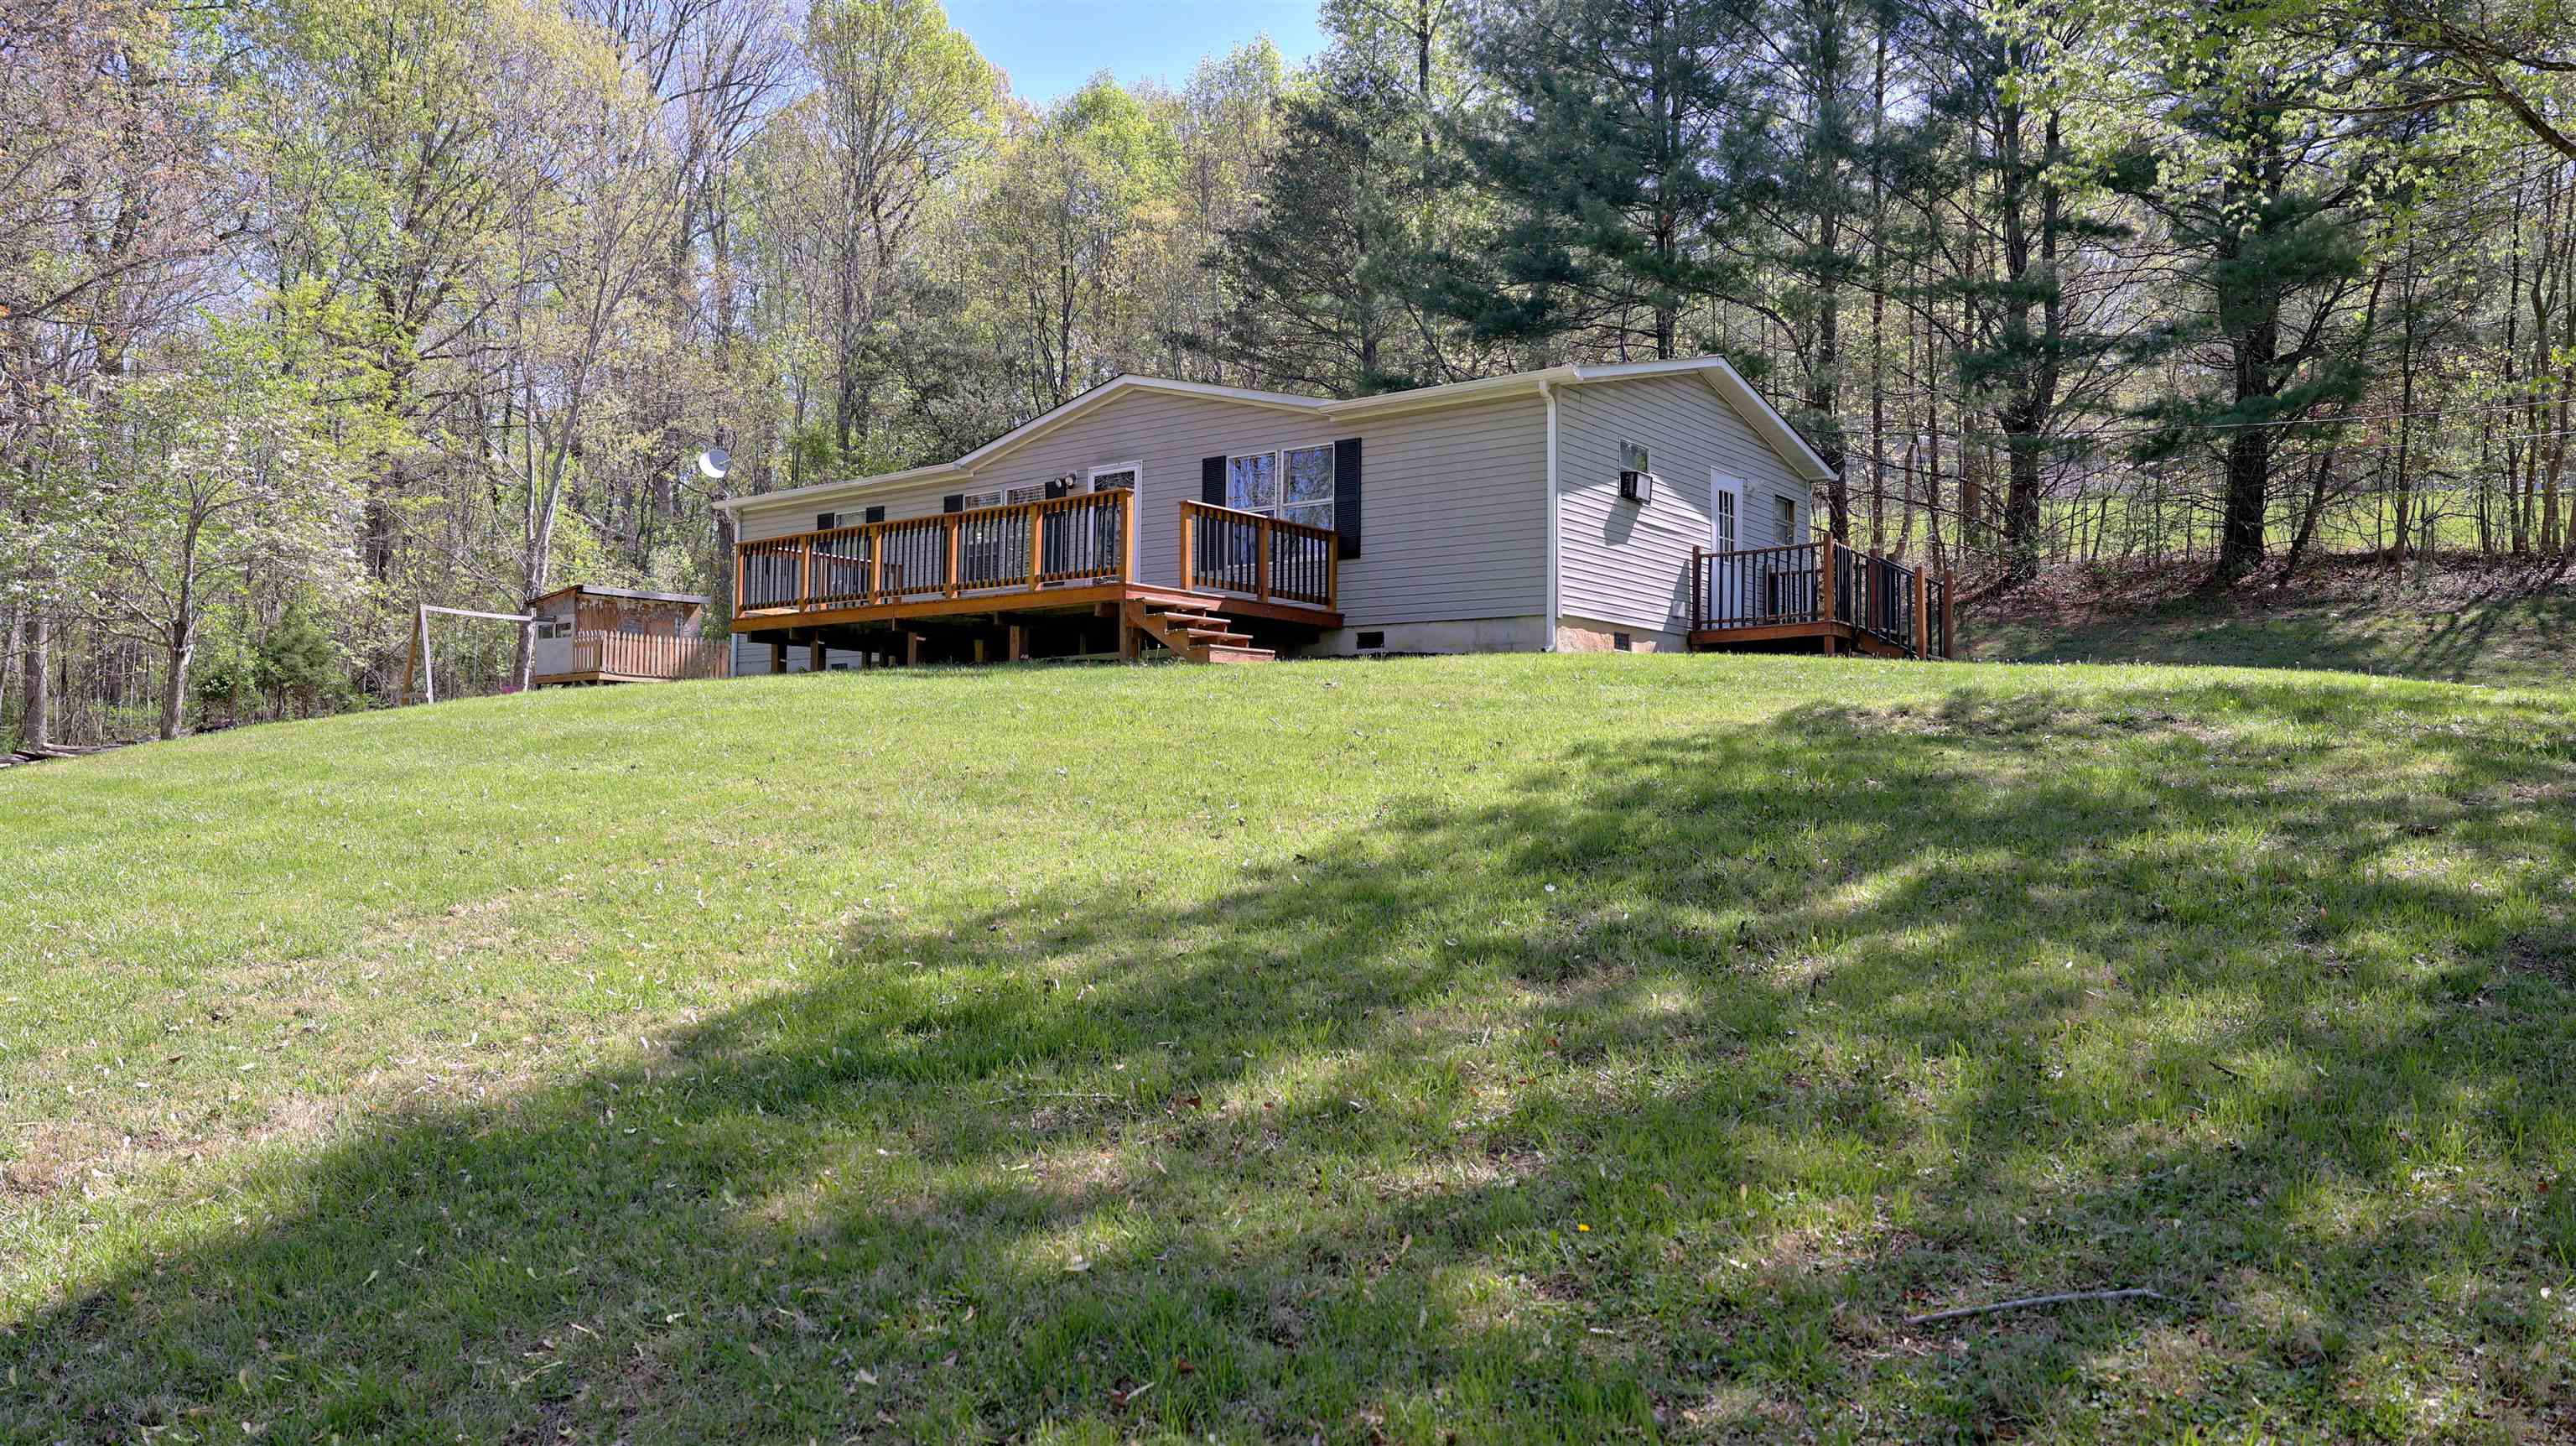 This updated three bedroom, two bath home sits on a private 1.422 acre lot surrounded by trees.  New 16'x24' deck (2023) added on the front, updated primary bathroom (2023), updated hall bathroom (2020) and flooring, new range (2022) and dishwasher (2022) and a new roof added in 2013. Home is located on the outskirts of Christiansburg just minutes from Downtown Christiansburg, Blacksburg, VT, the Aquatic Center, shopping, restaurants & I-81. There is a large 12x20 storage building with roll up door that conveys. Great home for a first time home buyer or investor.